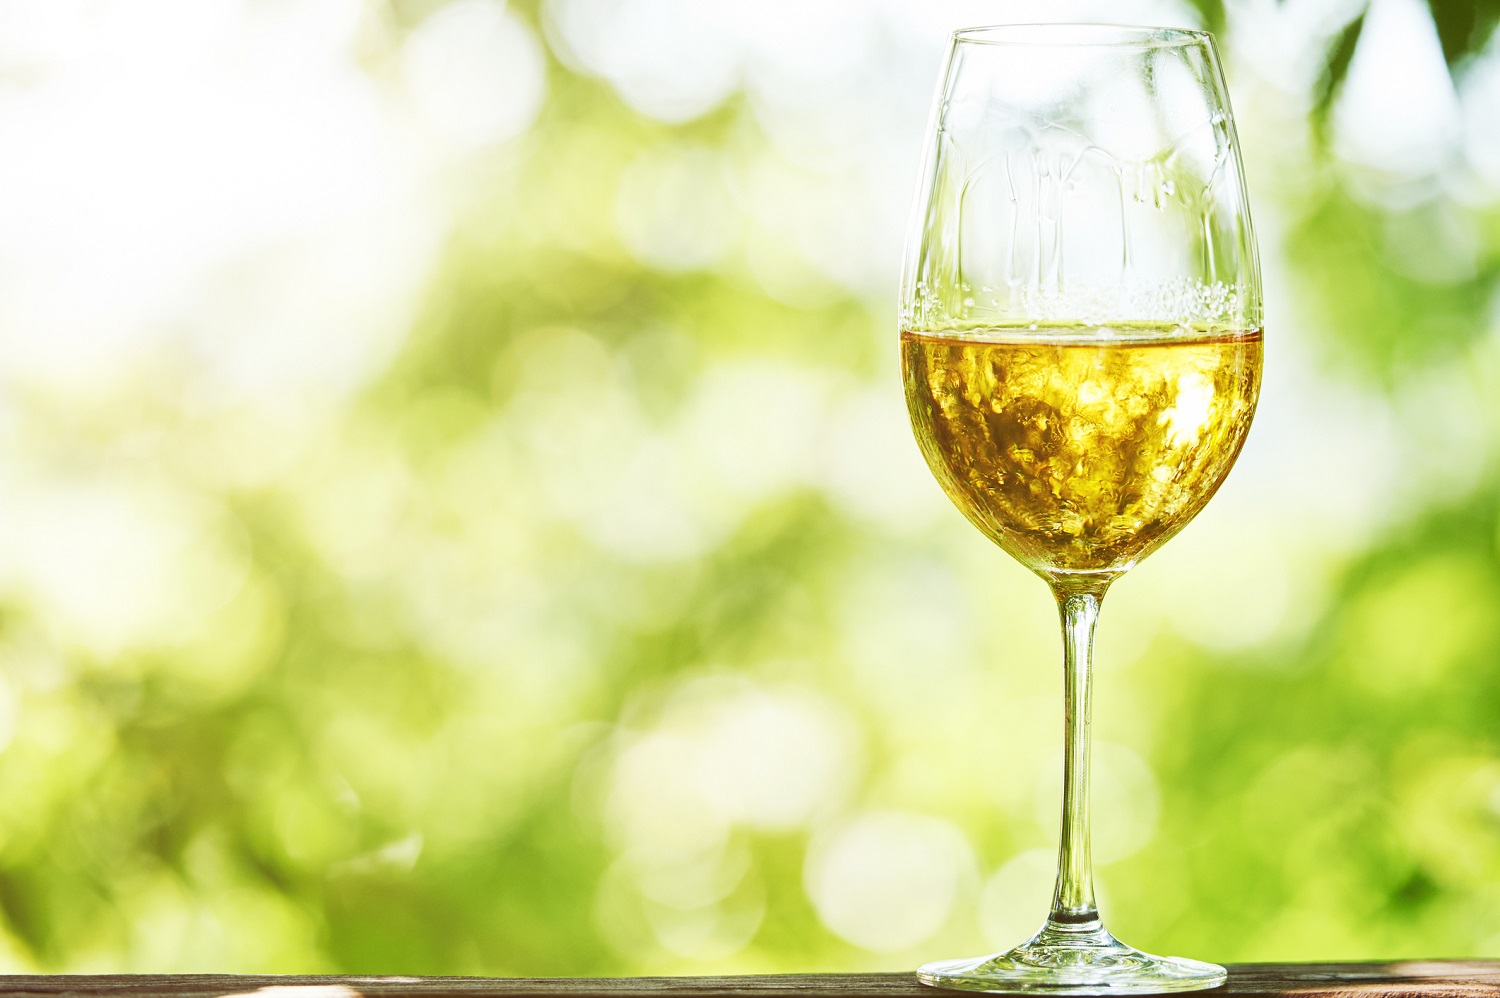 Glass of Chardonnay against a natural background